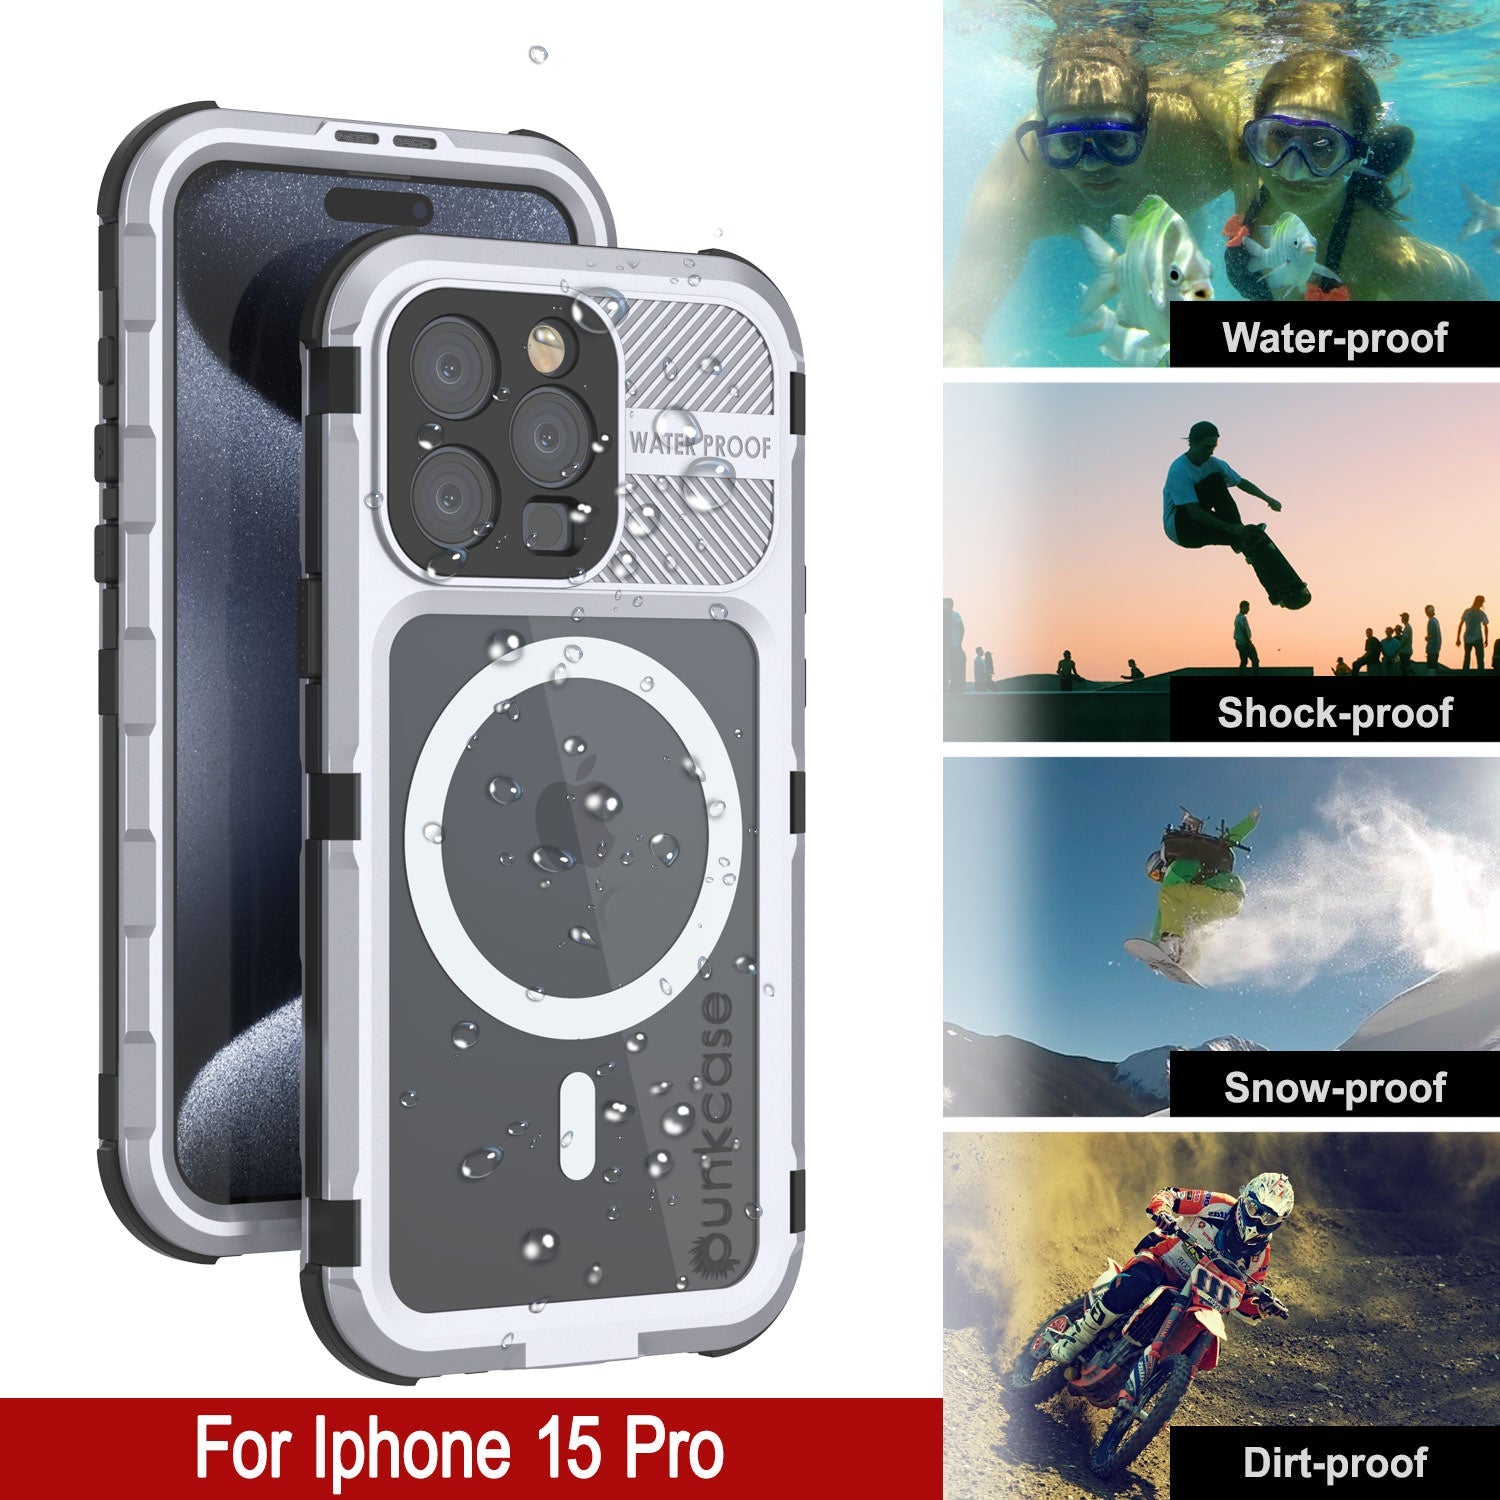 iPhone 15 Pro Metal Extreme 2.0 Series Aluminum Waterproof Case IP68 W/Buillt in Screen Protector [White]